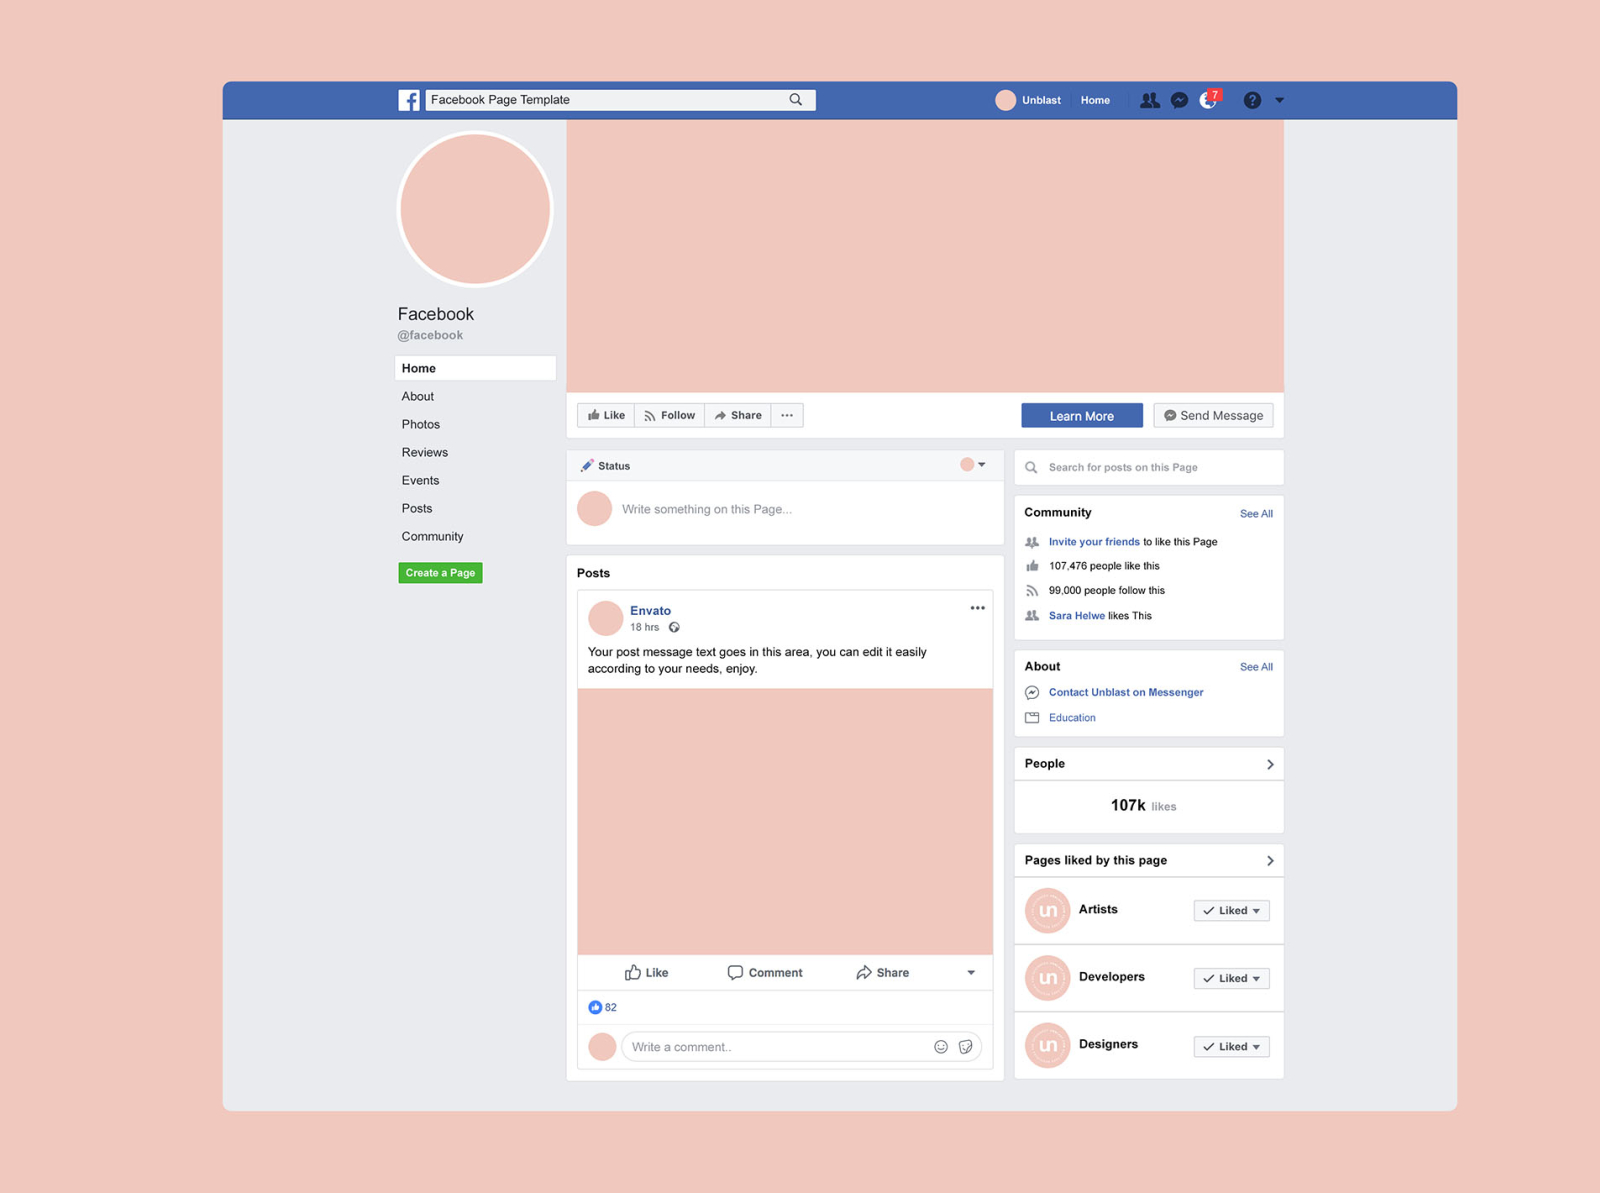 Facebook Page Mockup 2020 By Unblast On Dribbble